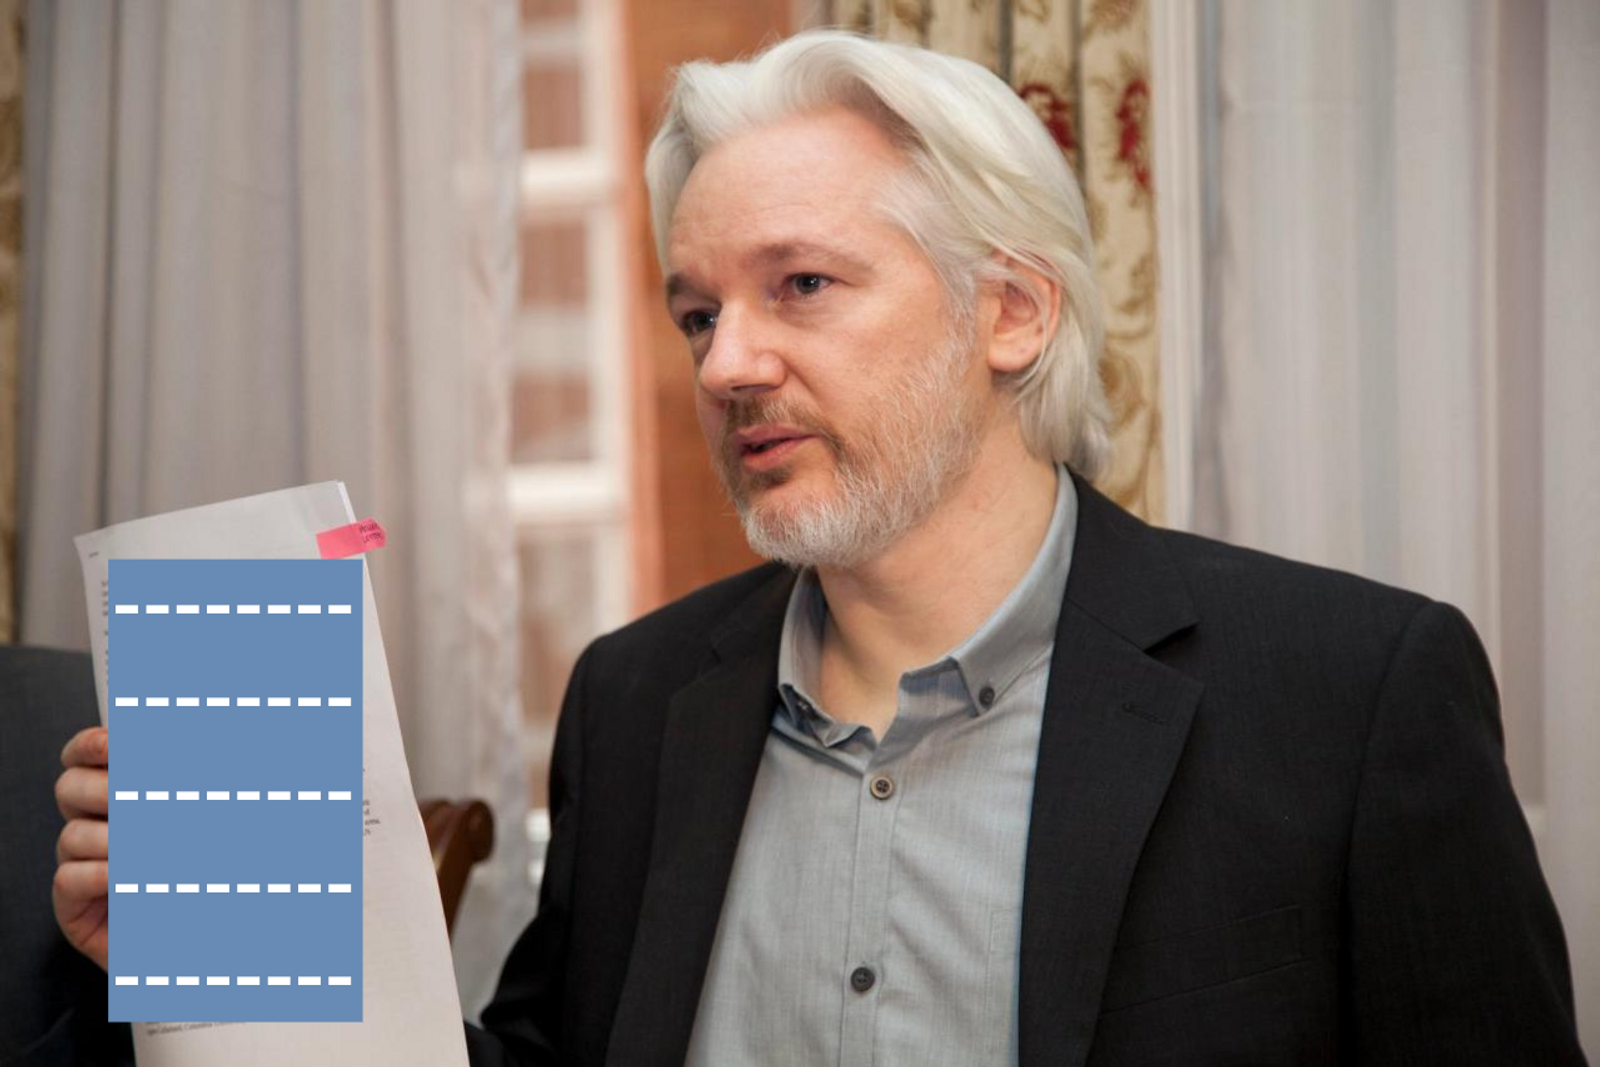 Julian Assange holds up a labeled document.